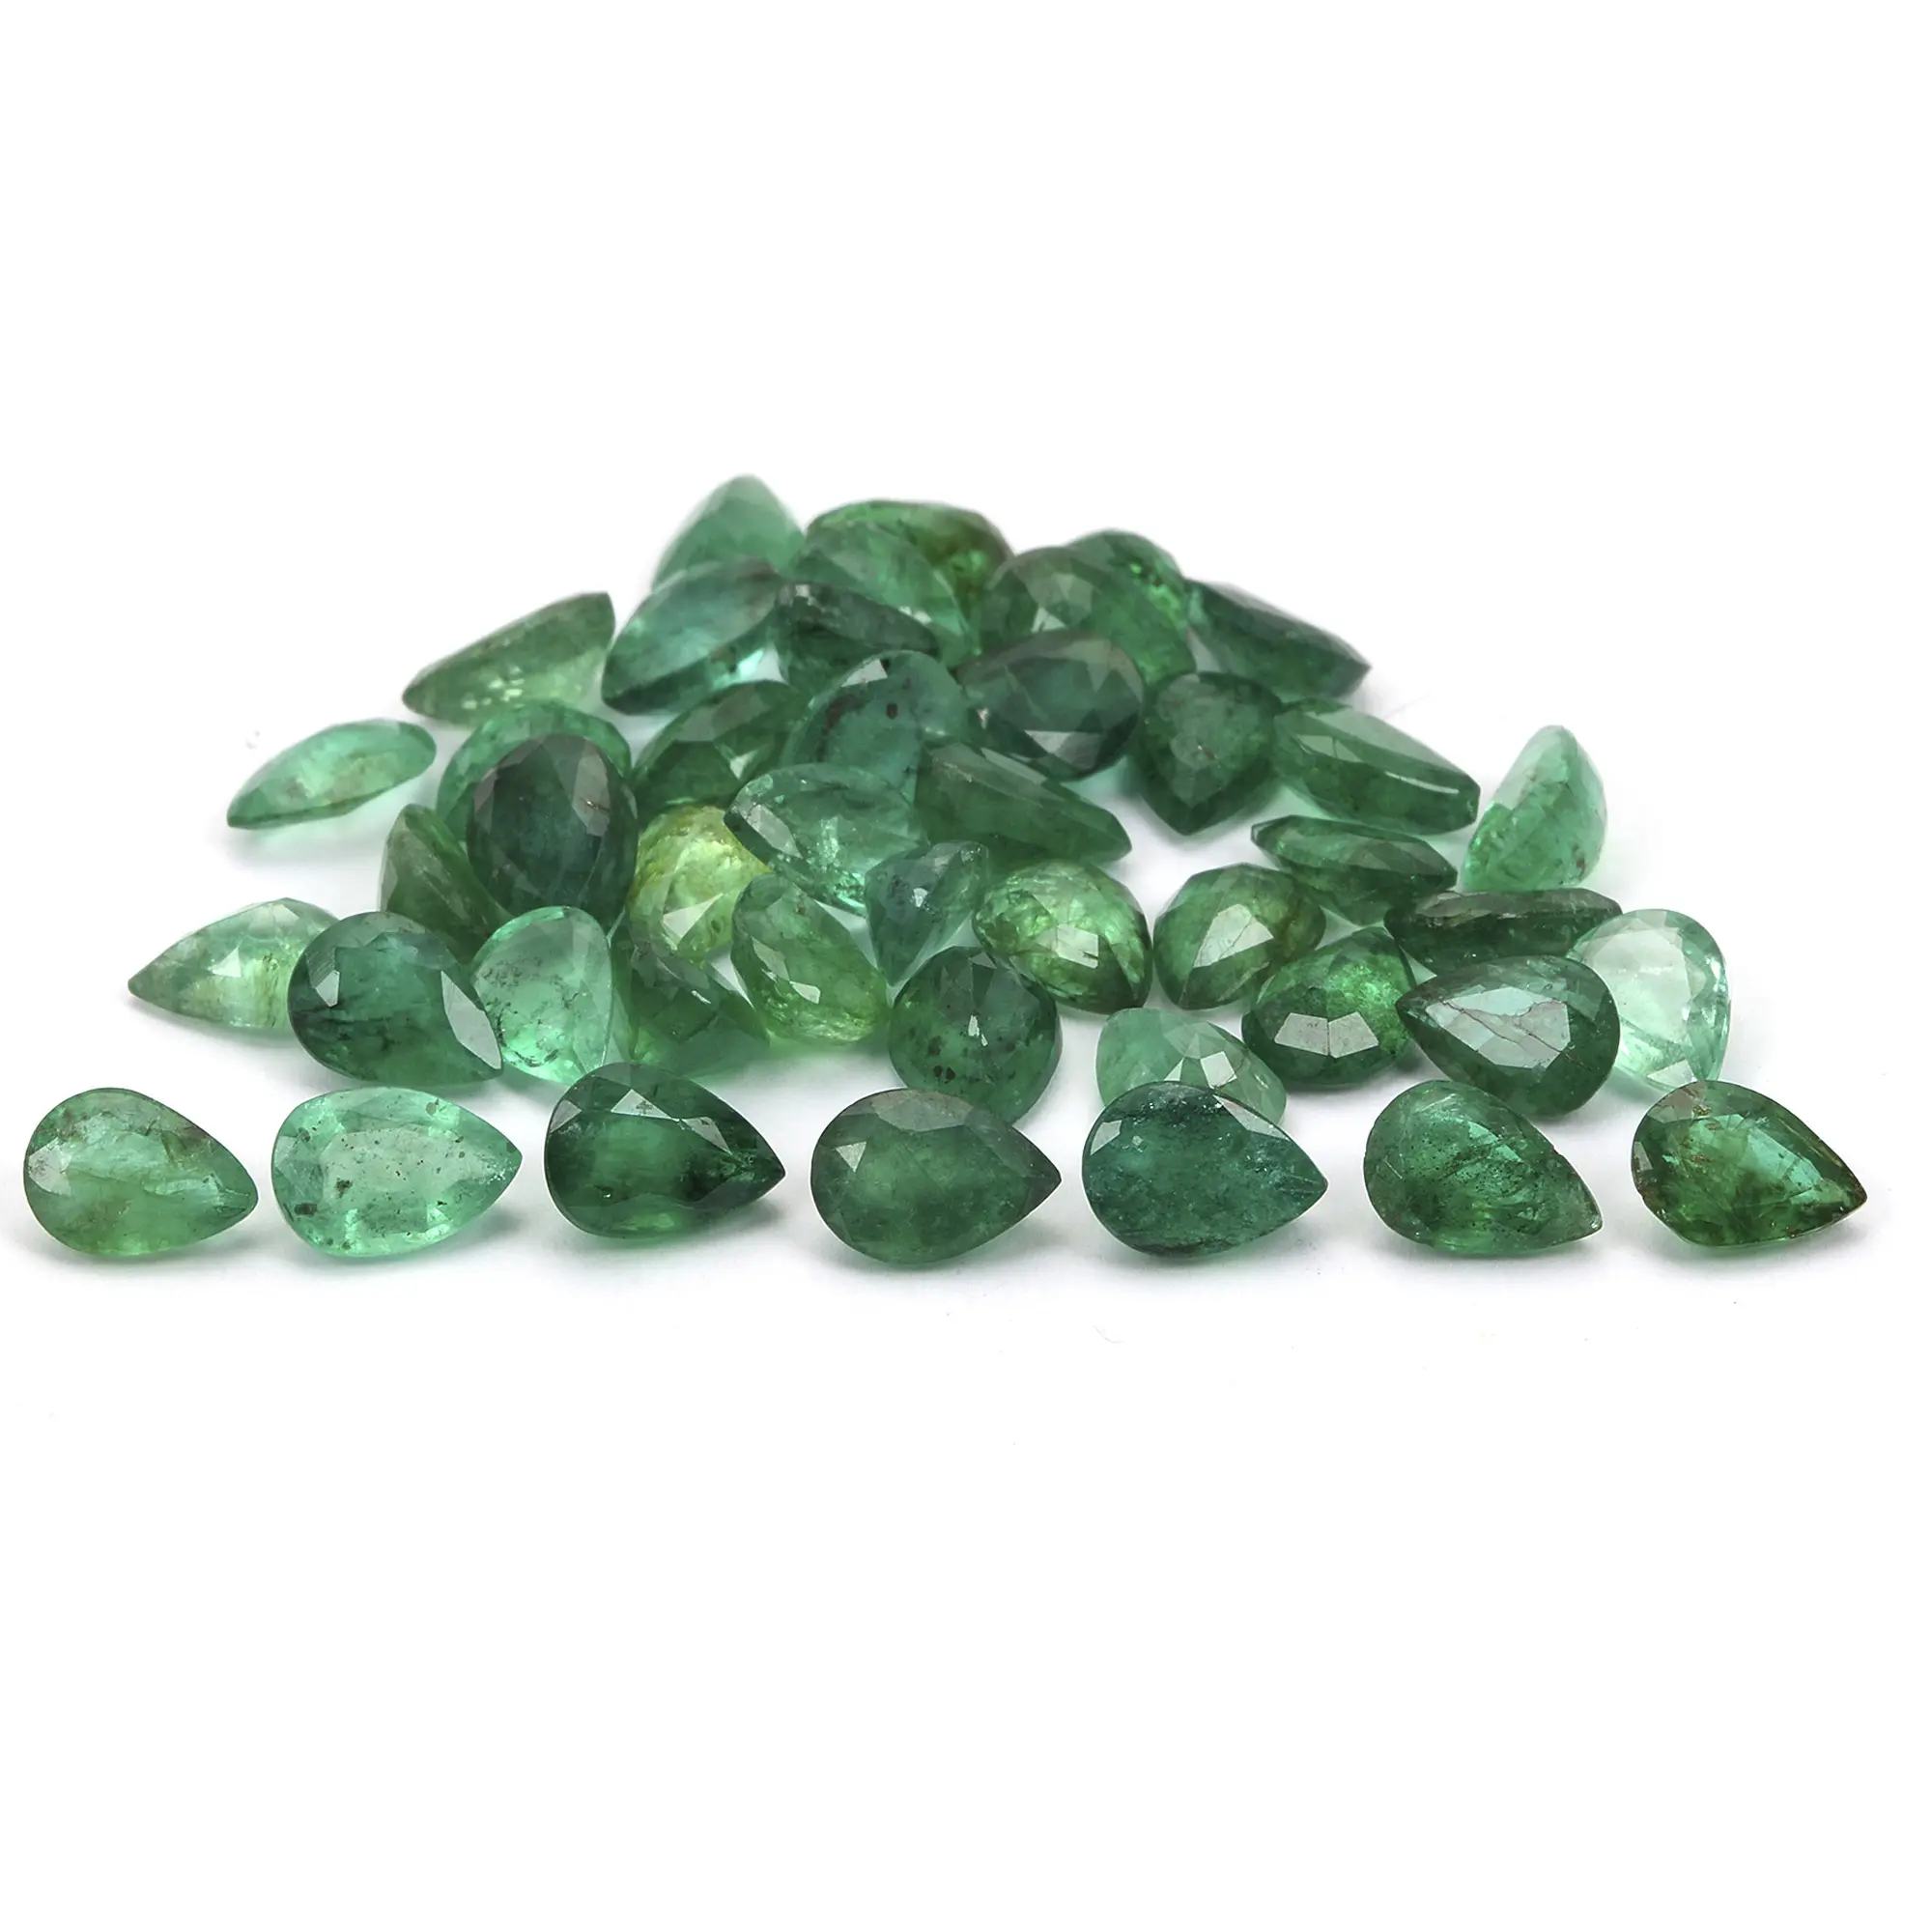 5 Carats Lot Emerald Pear 7x5mm Approx. 8 Pieces Natural Emerald Stone Faceted Cut Green Gemstone for Making Jewelry